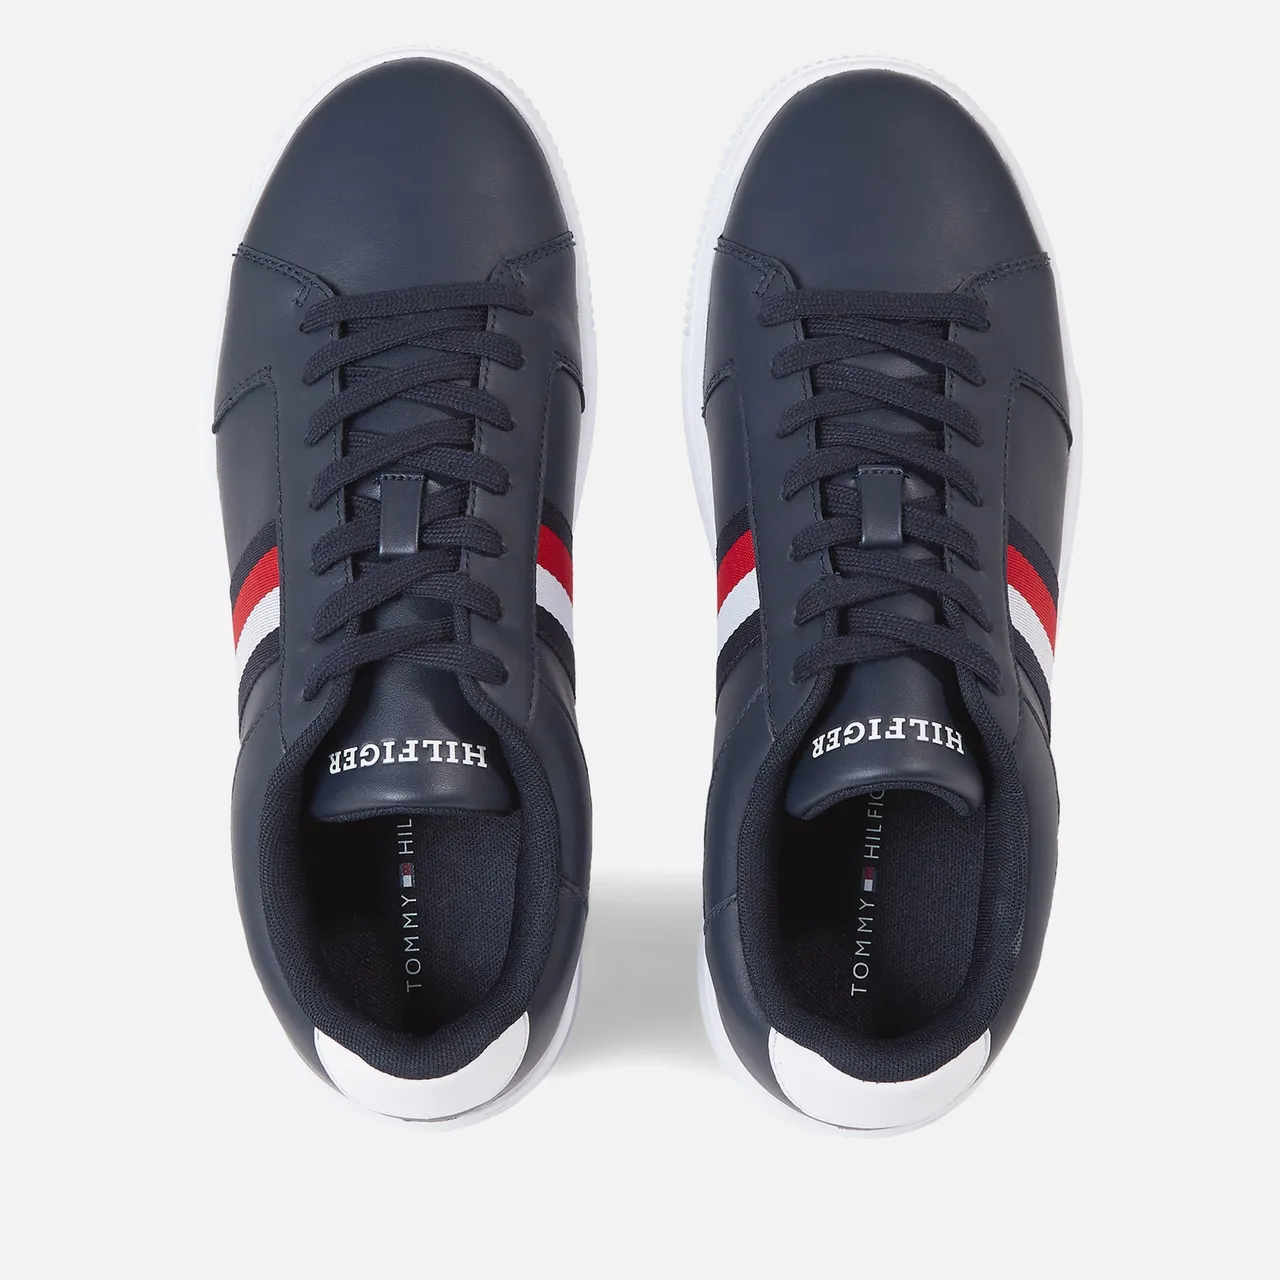 Tommy Hilfiger Cupsole Trainers